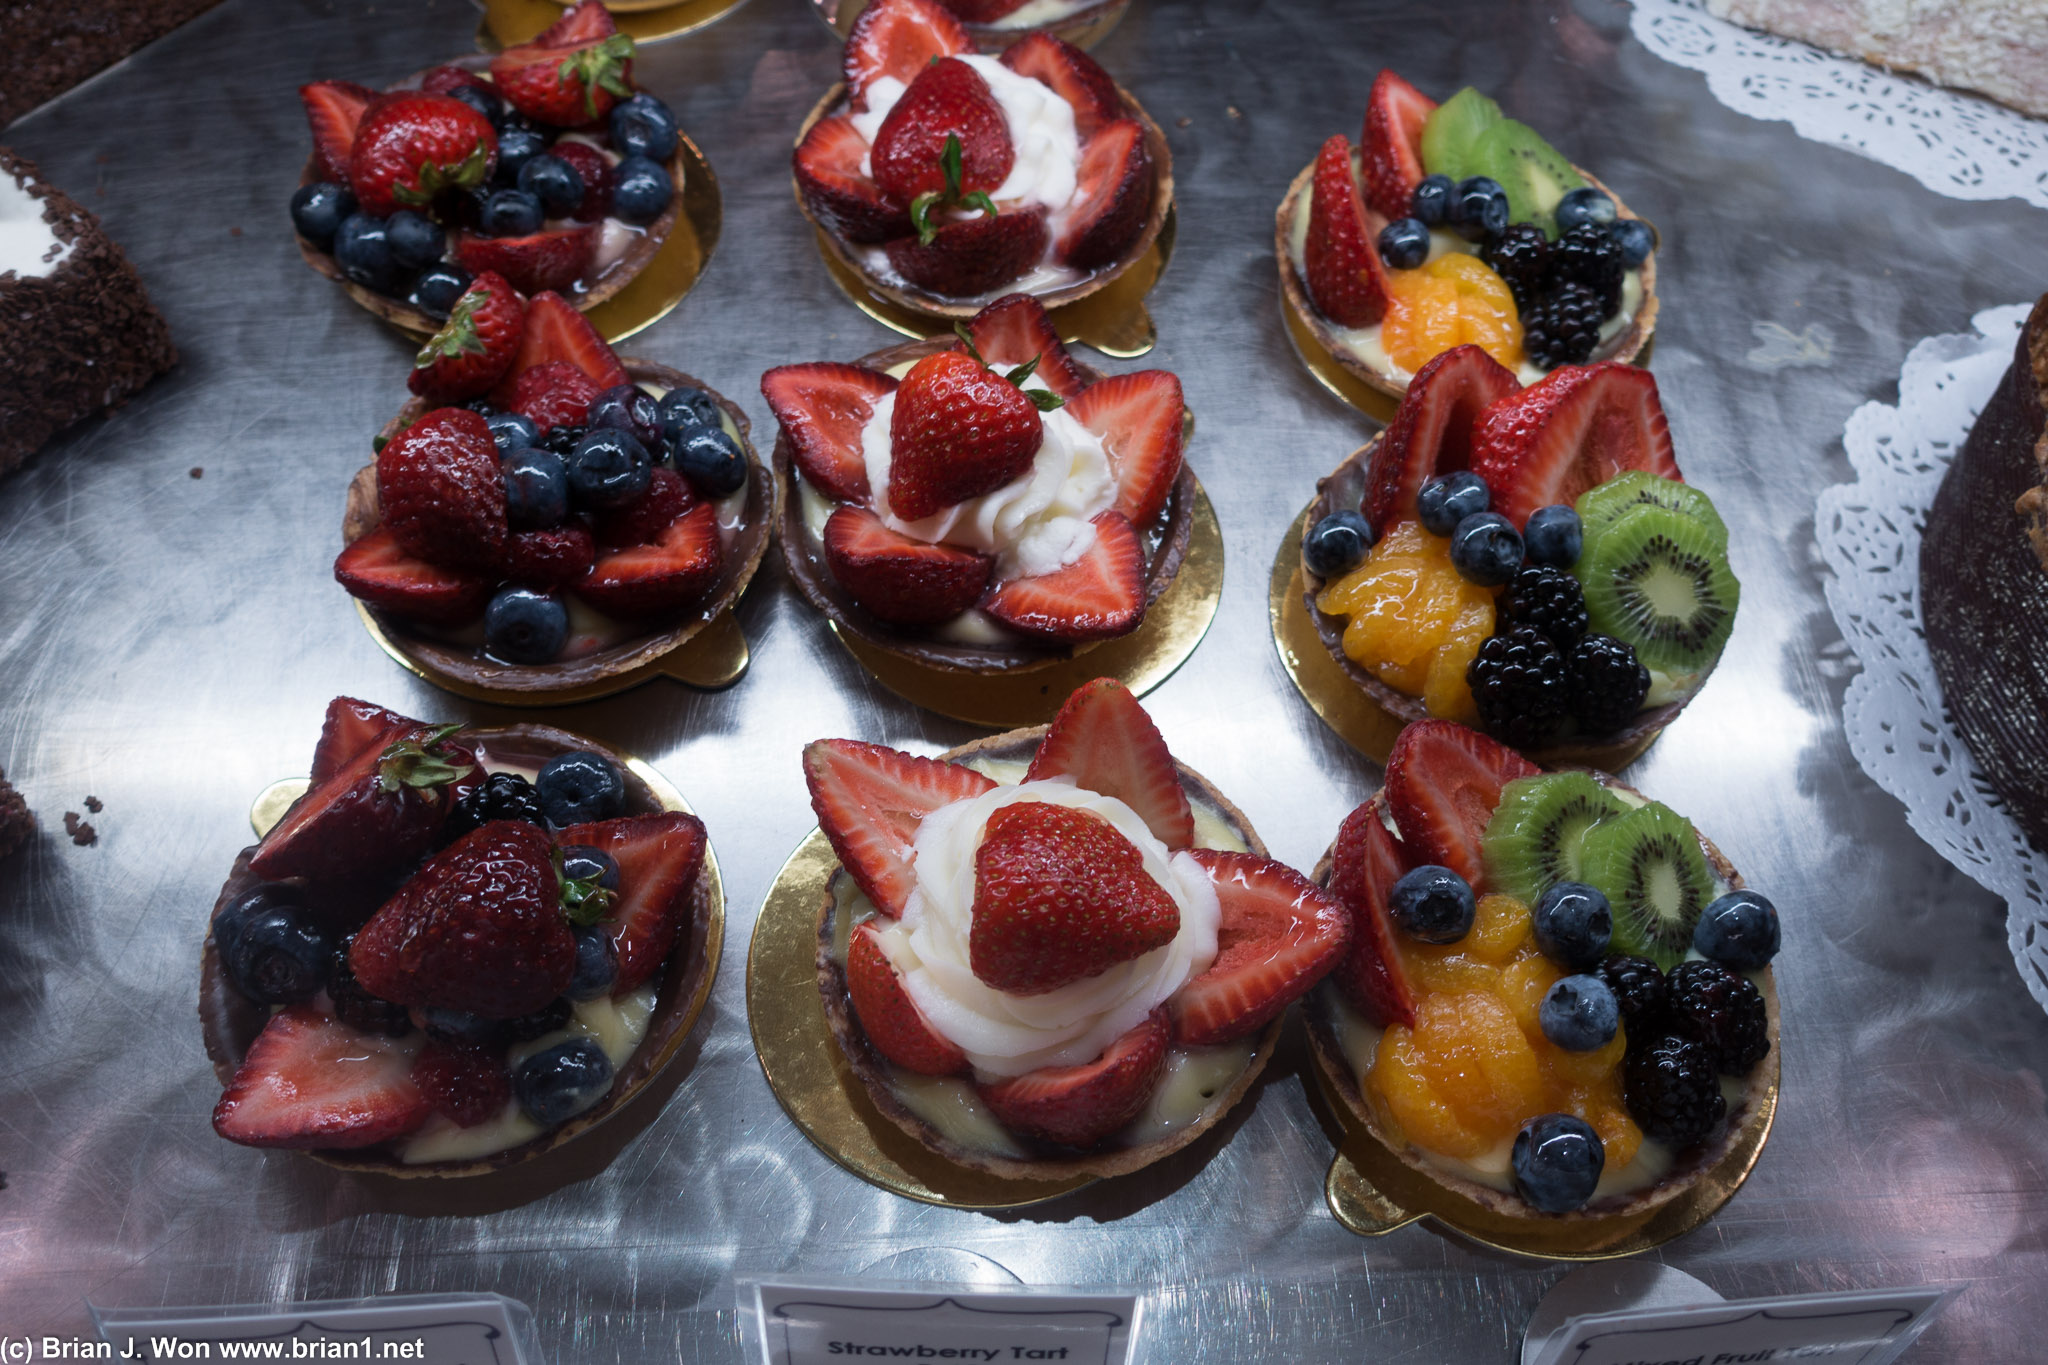 Fruit tarts look fairly generic. Not that that's a bad thing.